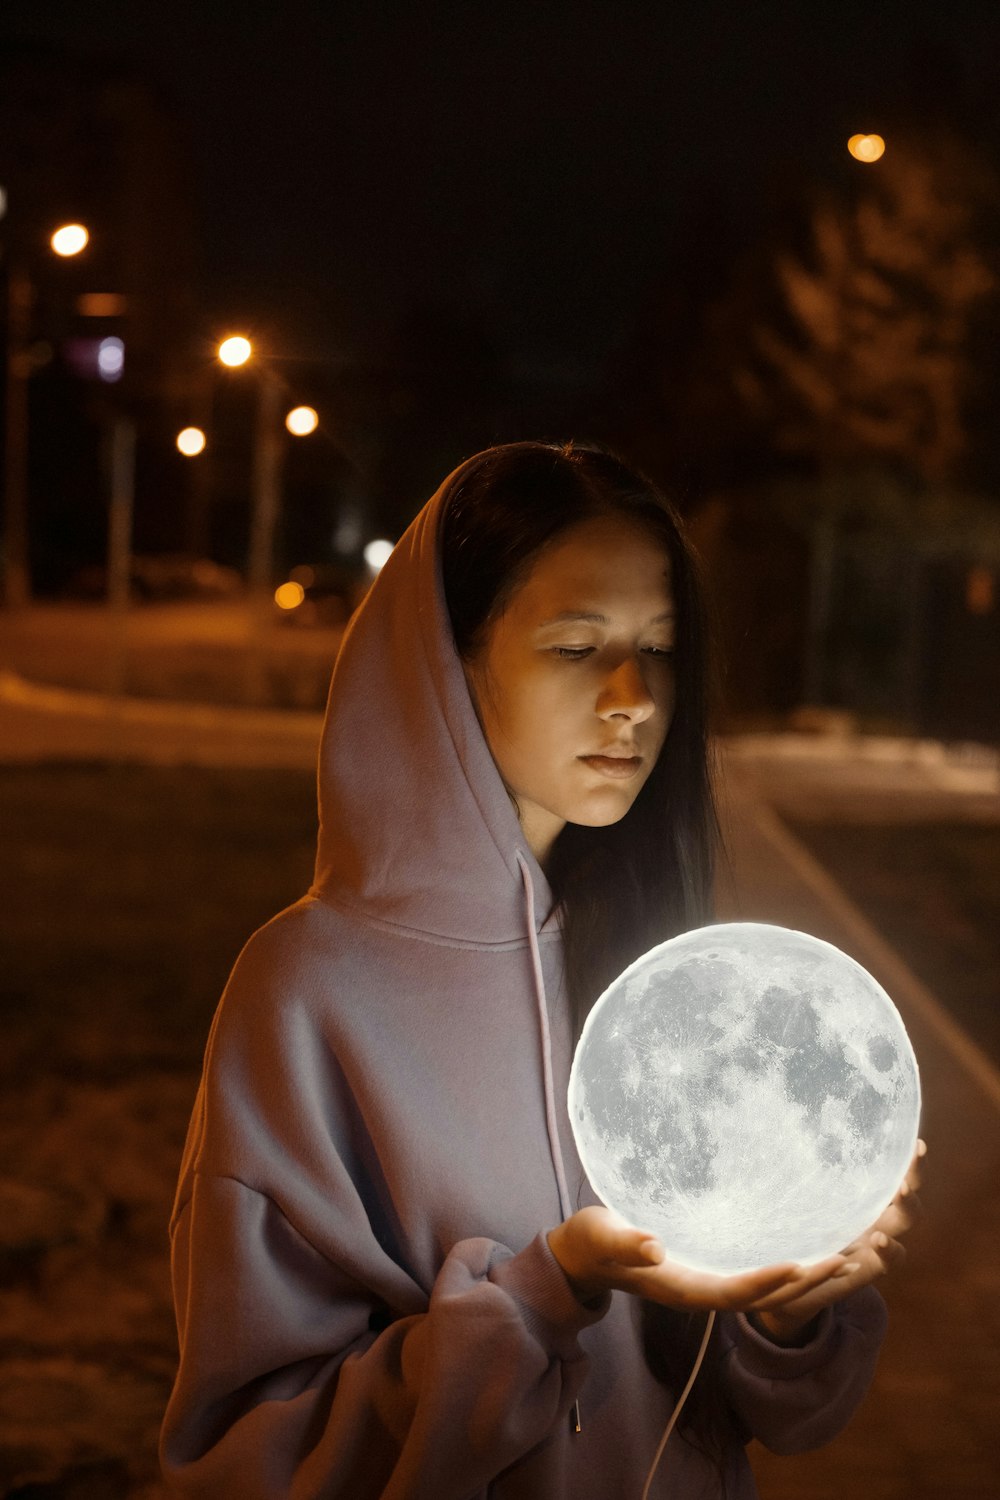 a woman in a hooded jacket holding a glowing moon